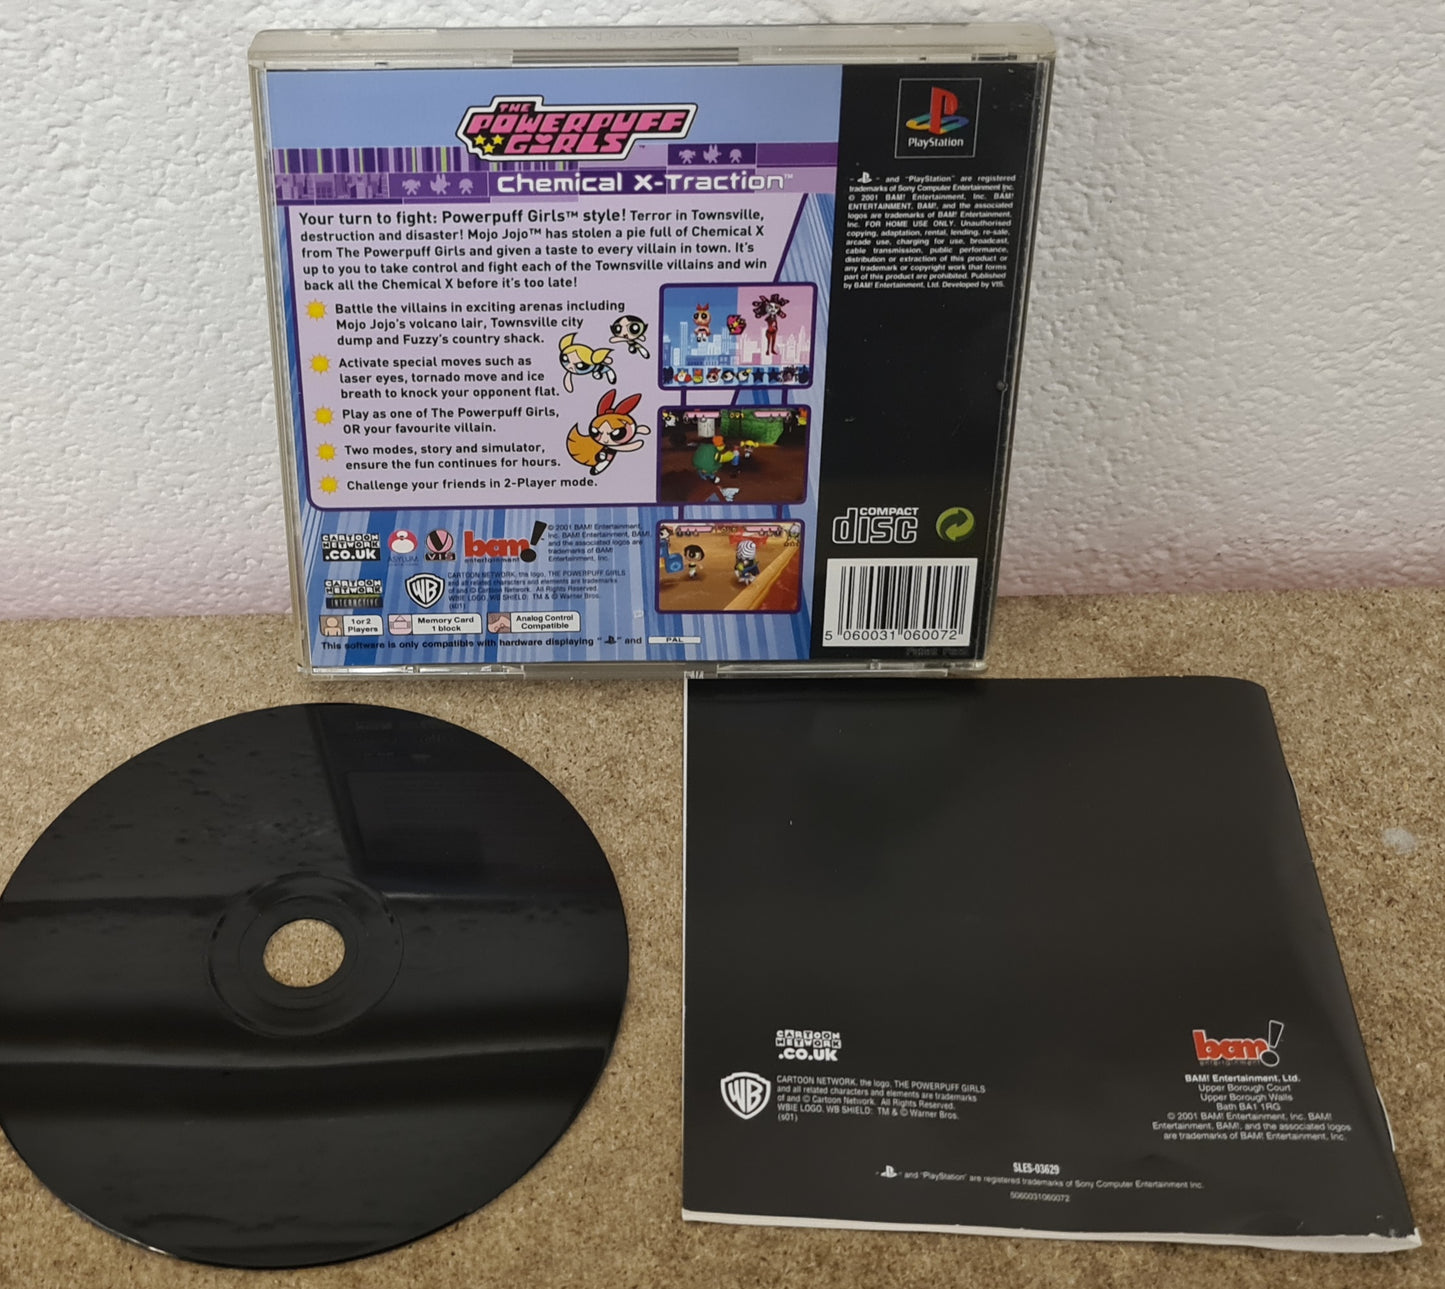 Powerpuff Girls - Chemical X-Traction Sony Playstation 1 (PS1) Game